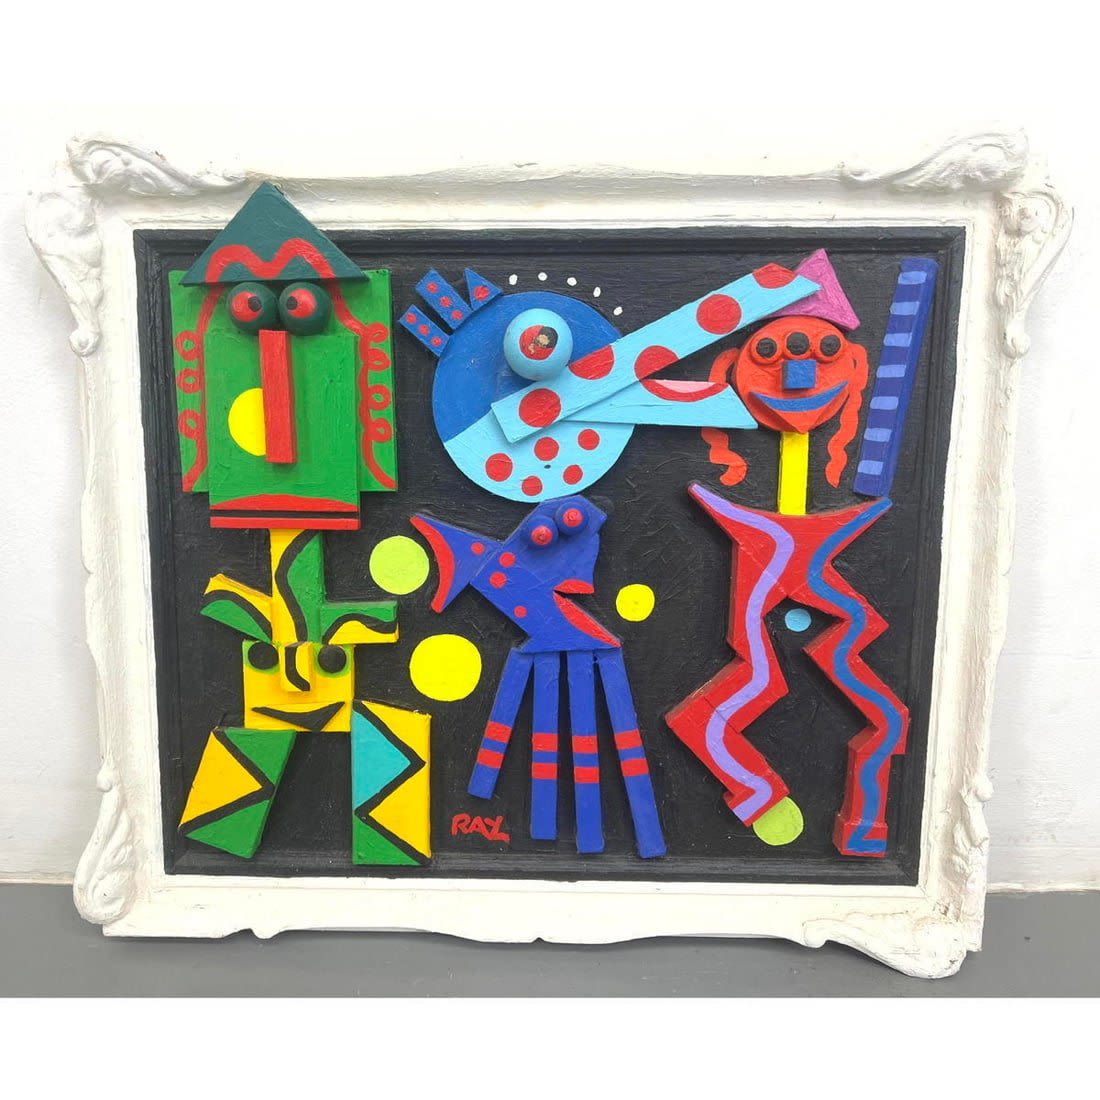 RAY Graphic Colored Figural Painting